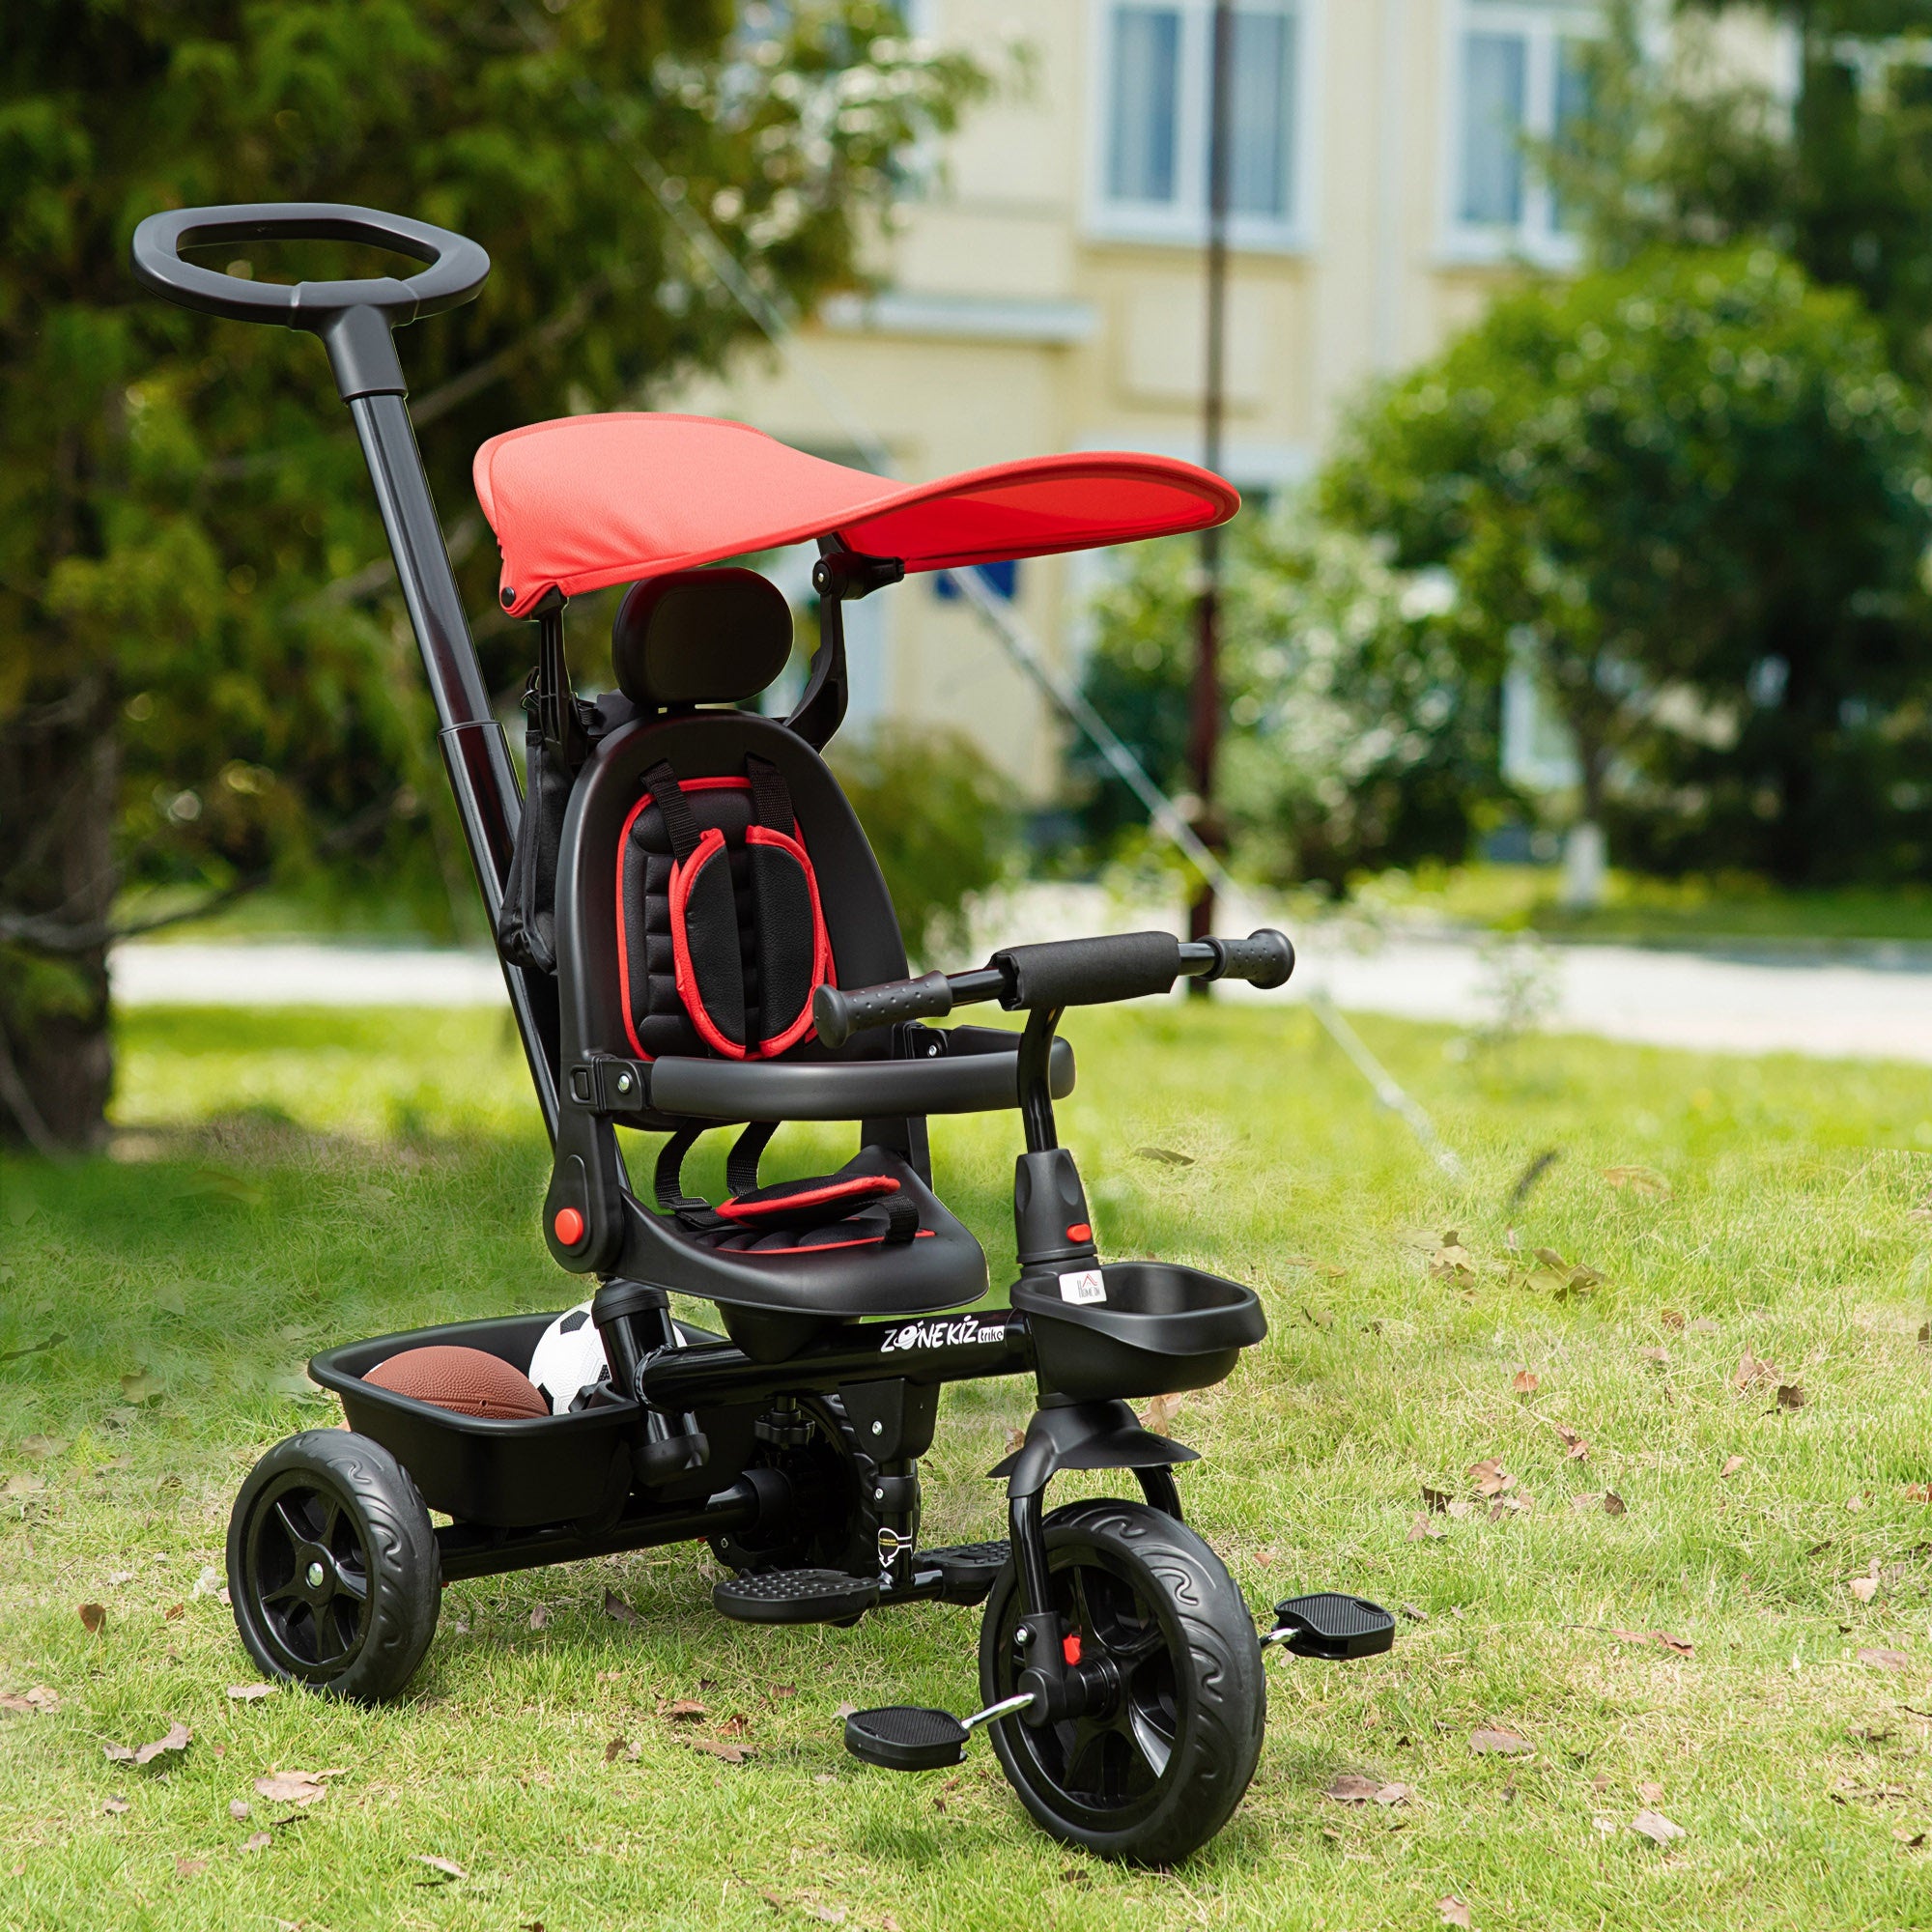 HOMCOM 4 in 1 Baby Tricycle Toddler Stroller Foldable Pedal Tricycle w/ Reversible Angle Adjustable Seat Removable Handle Canopy Handrail Belt-Red - Inspirely